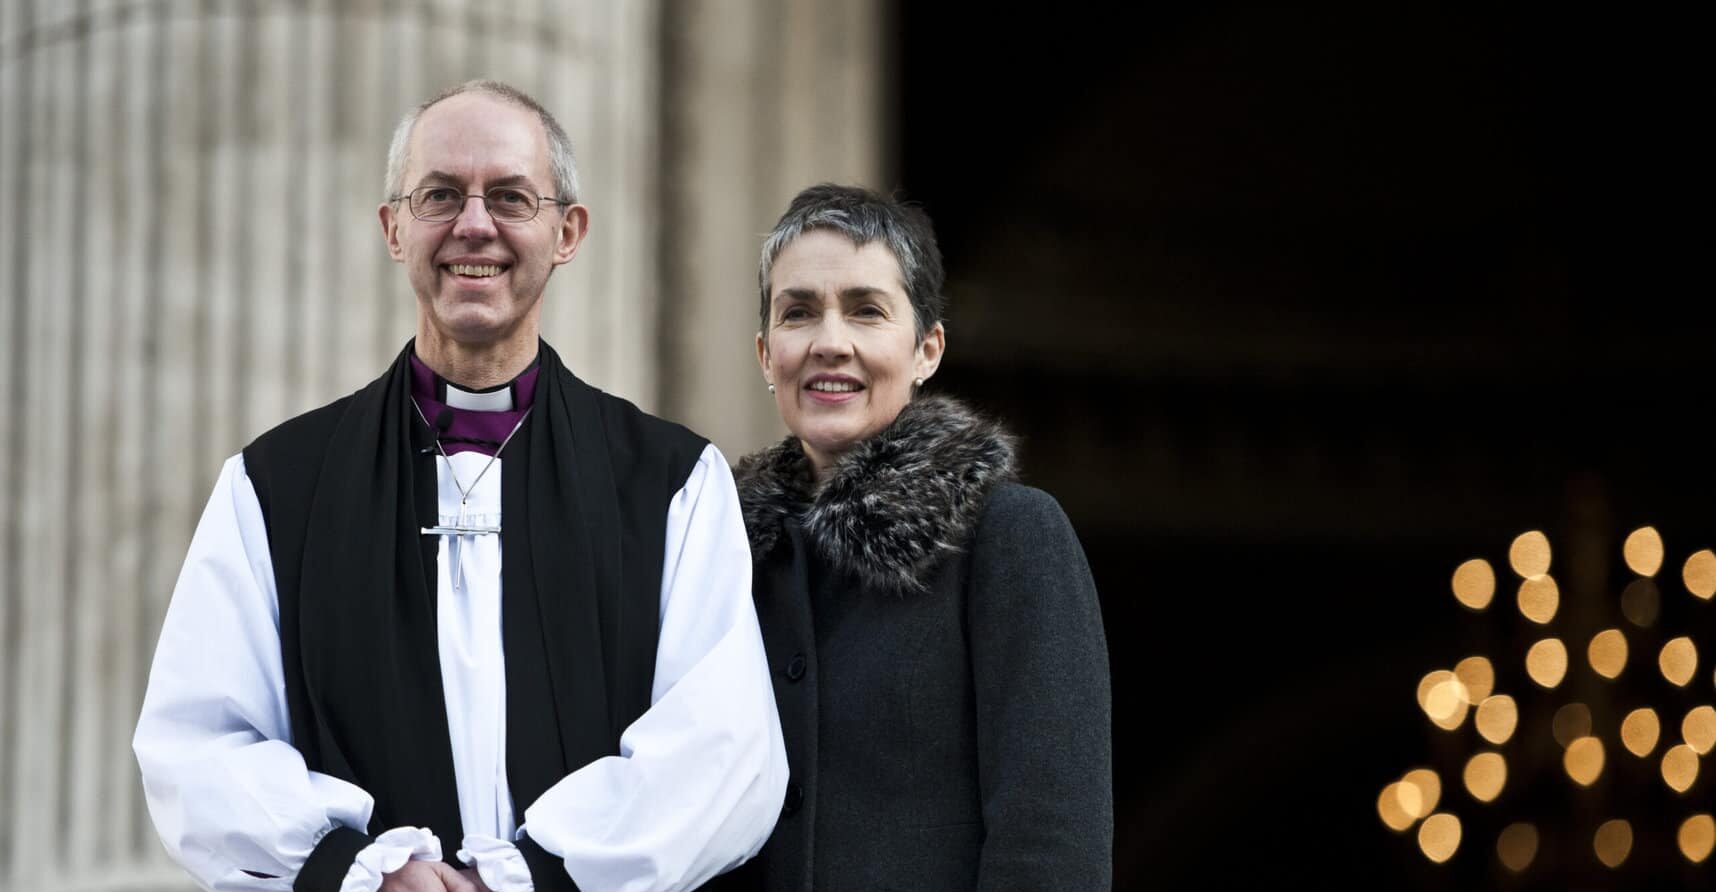 Photo shows the Archbishop of Canterbury in official clothing.